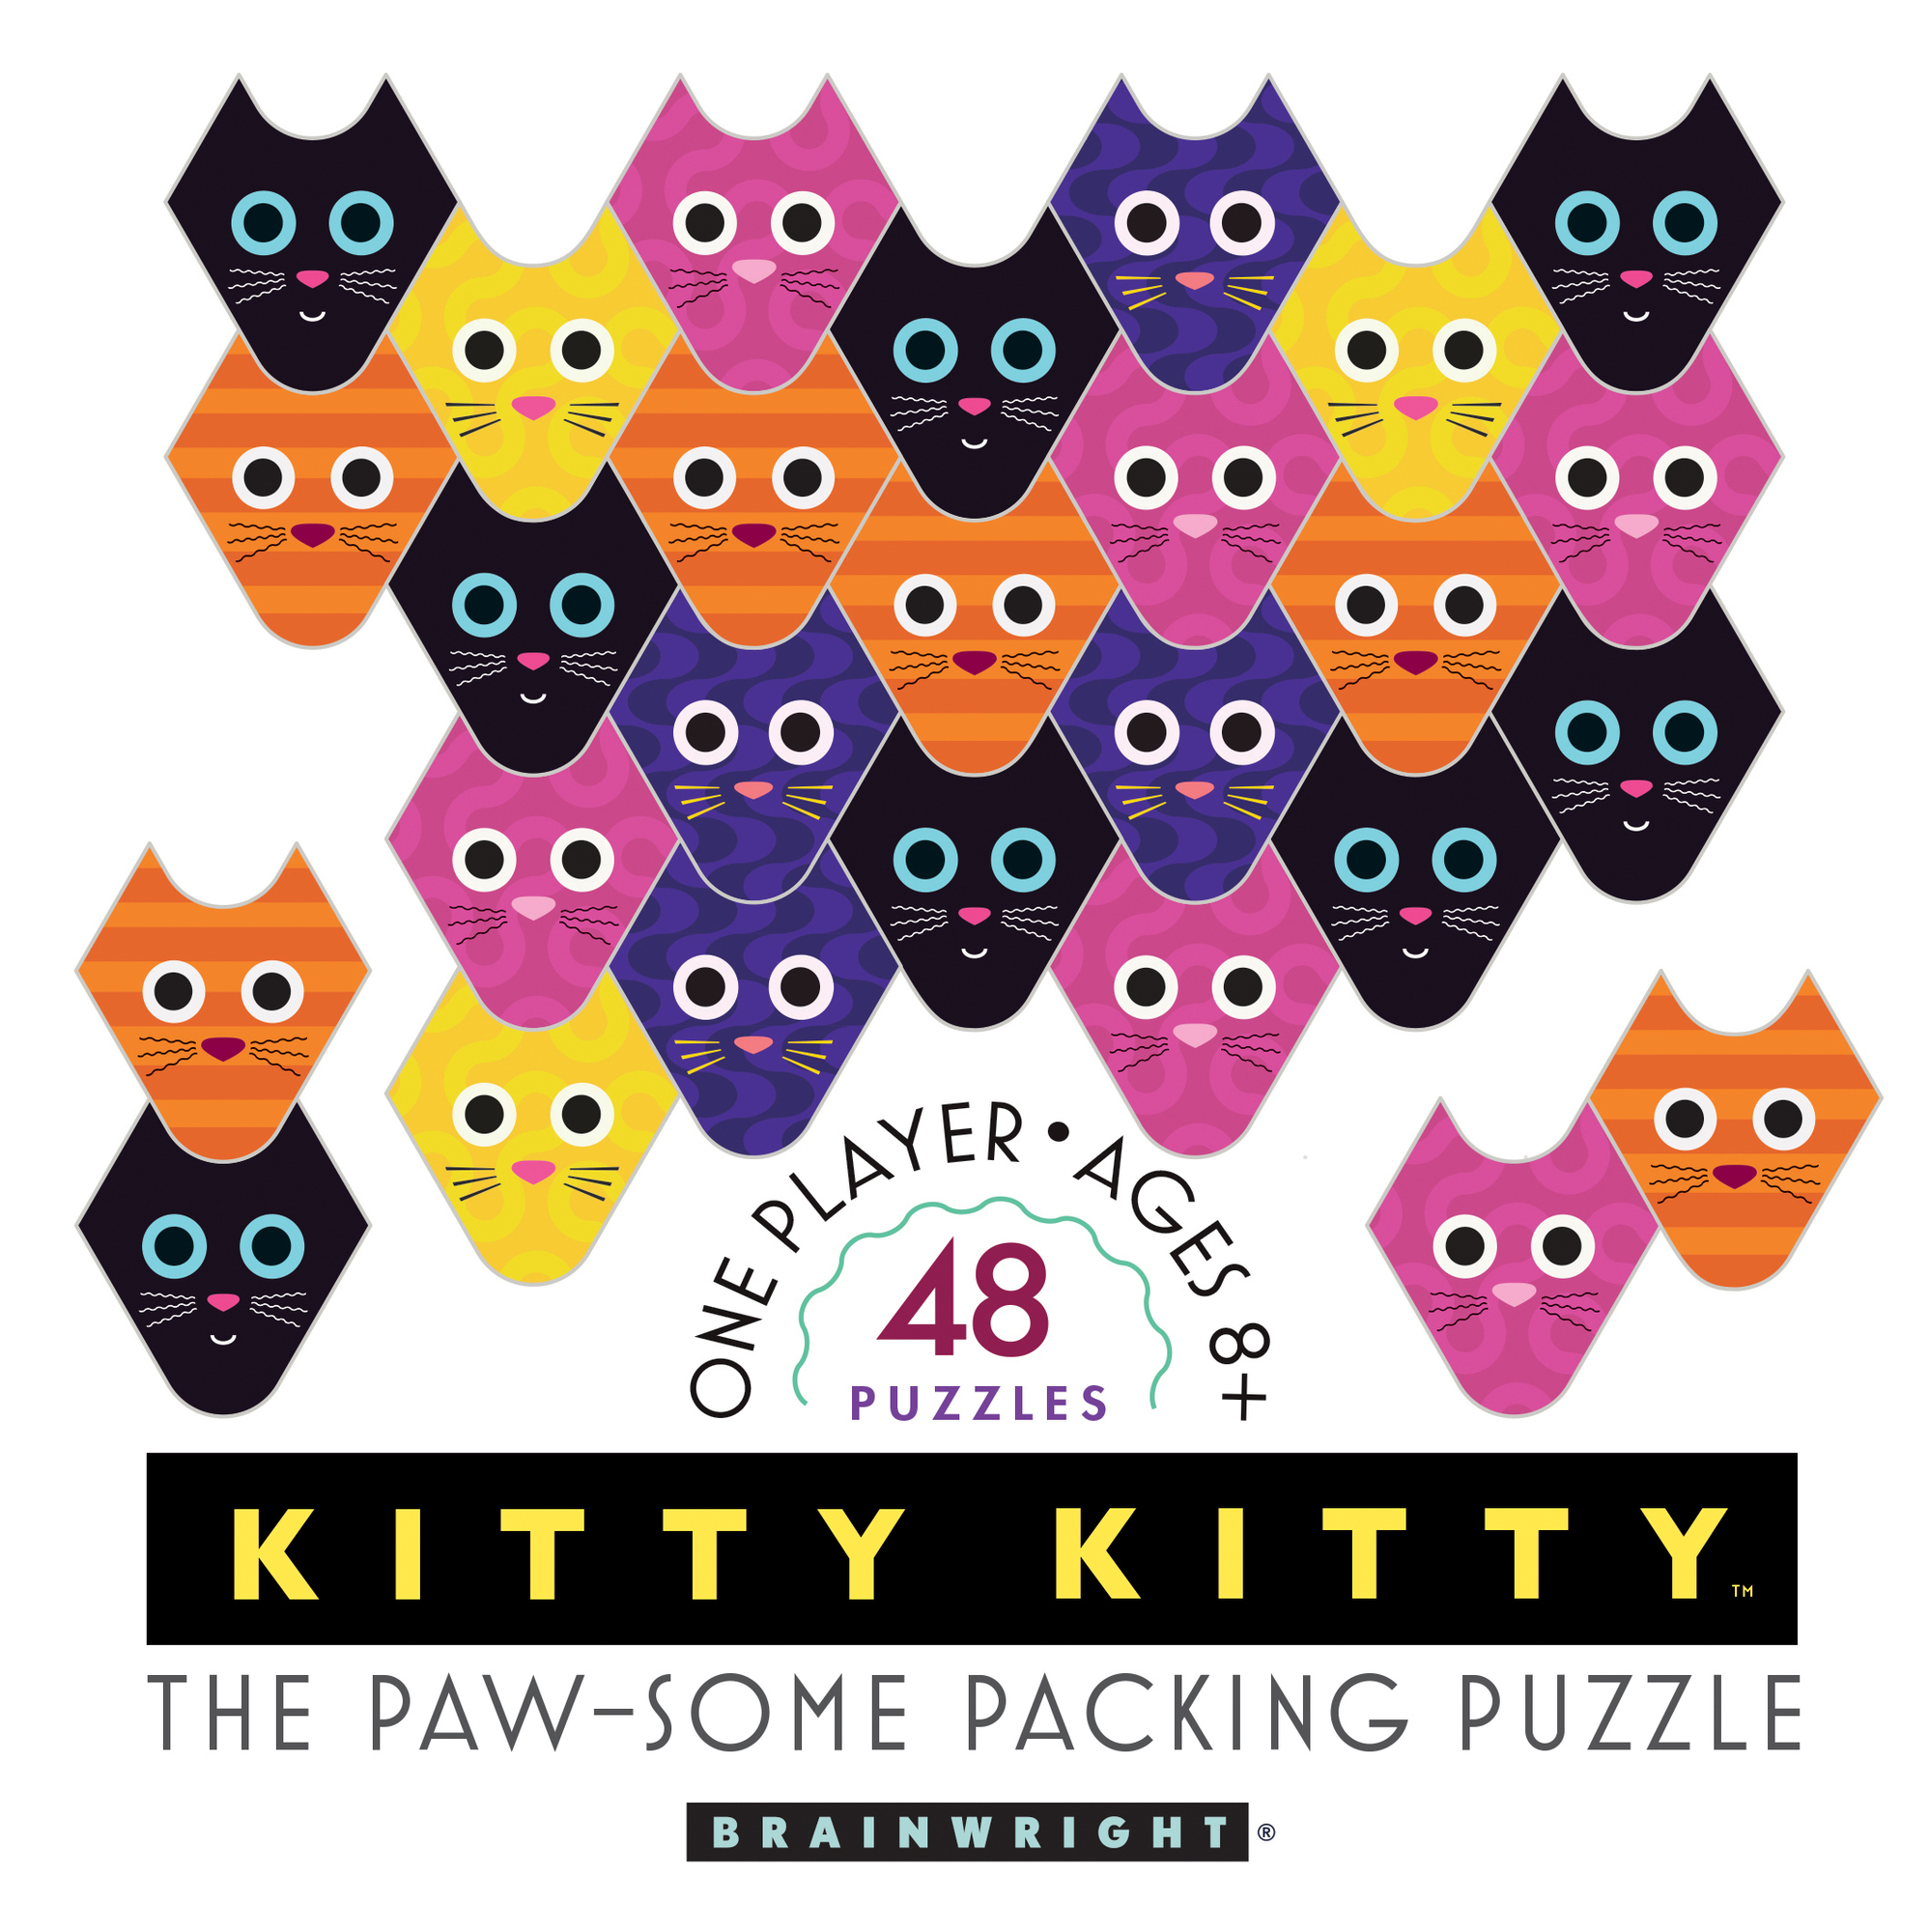 The Paw-some Packing Puzzle.